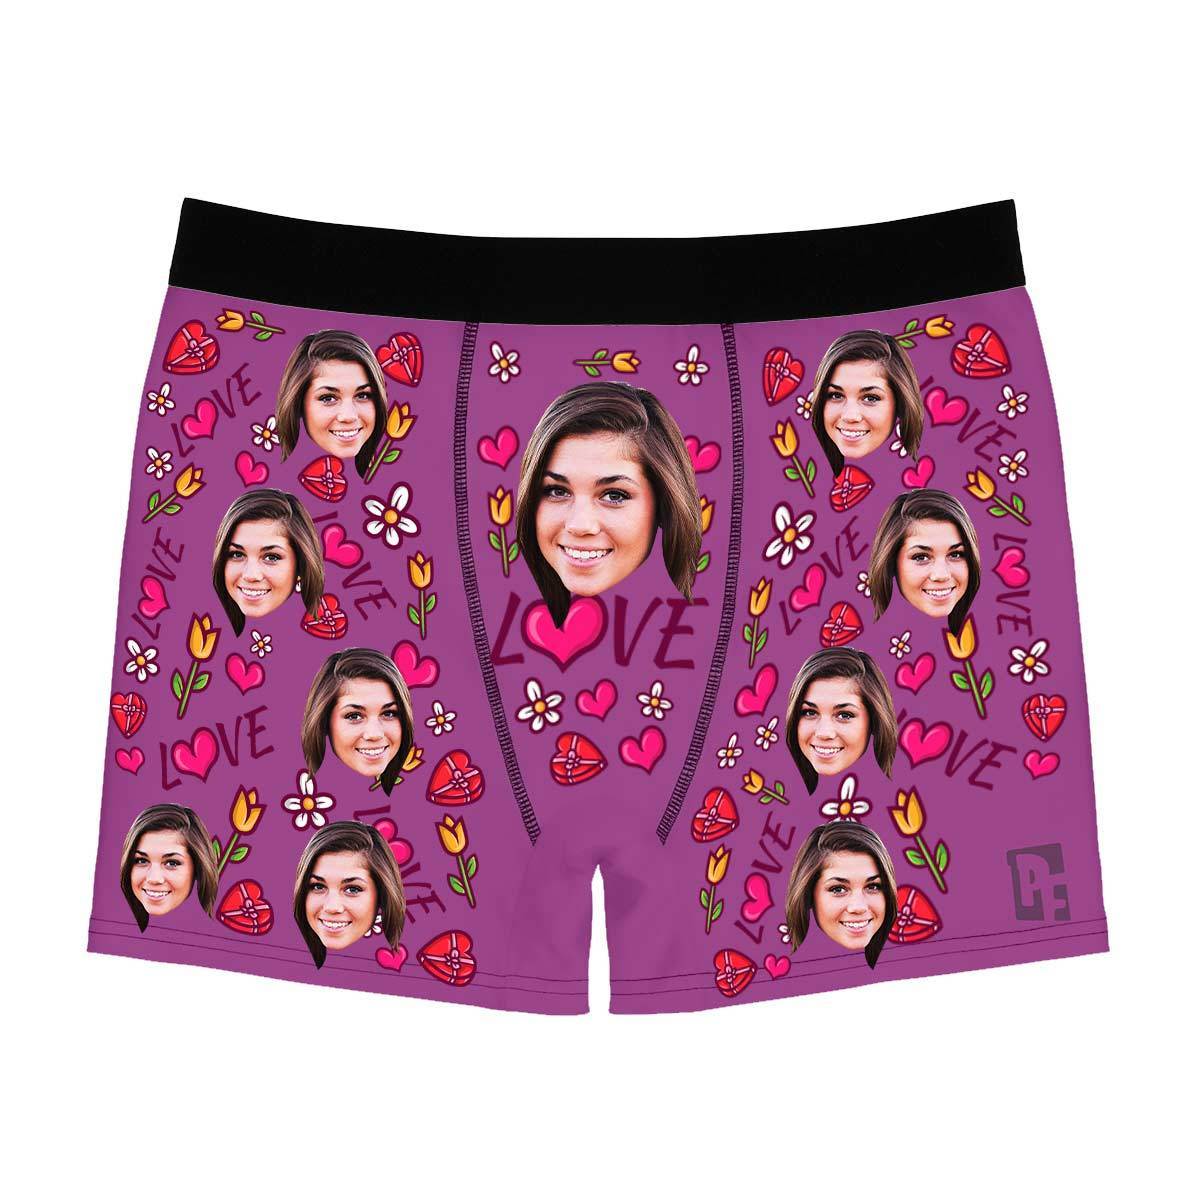 Purple Hearts and Flowers men's boxer briefs personalized with photo printed on them